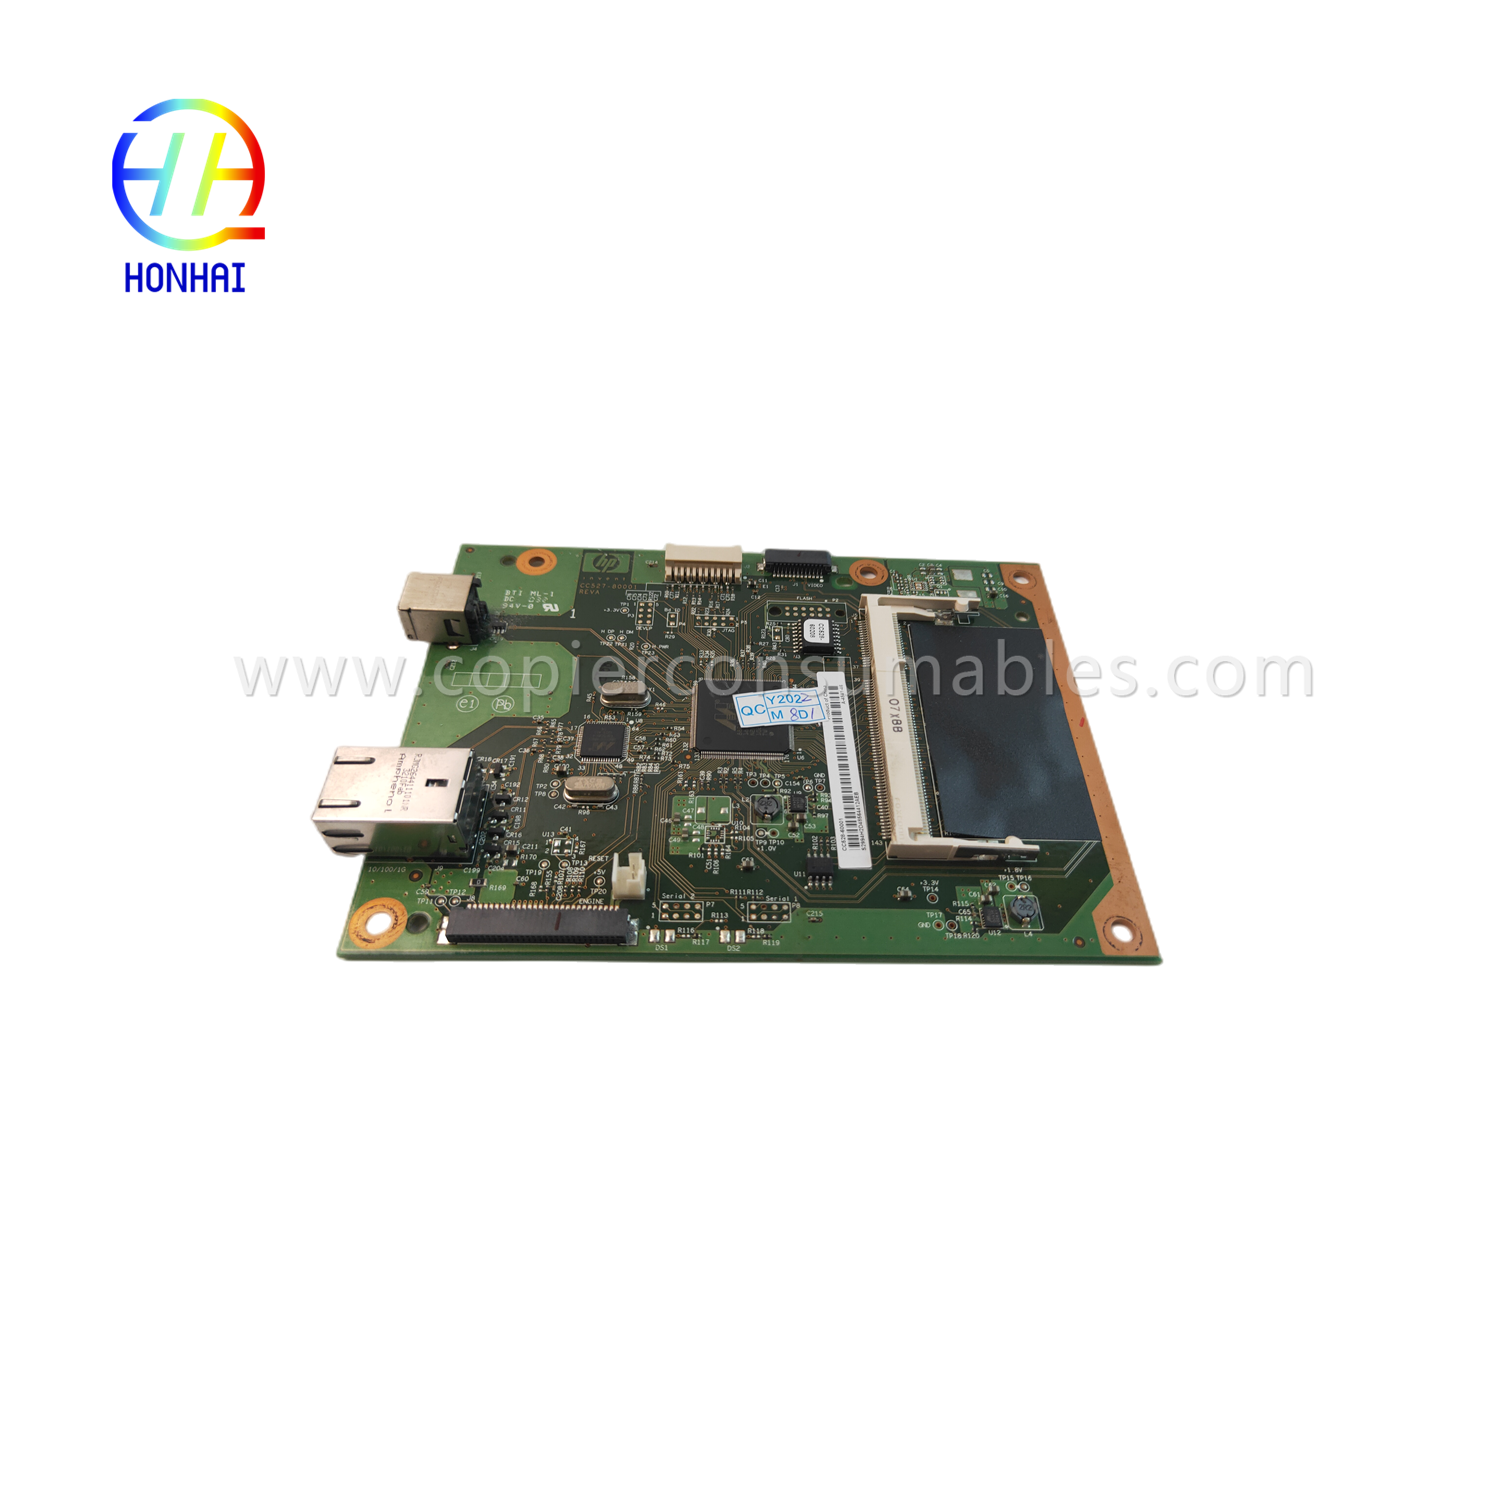 https://c585.grao.net/formatter-board-assembly-for-hp-cc528-60001-para-laserjet-p2055dn-mainboard-product/